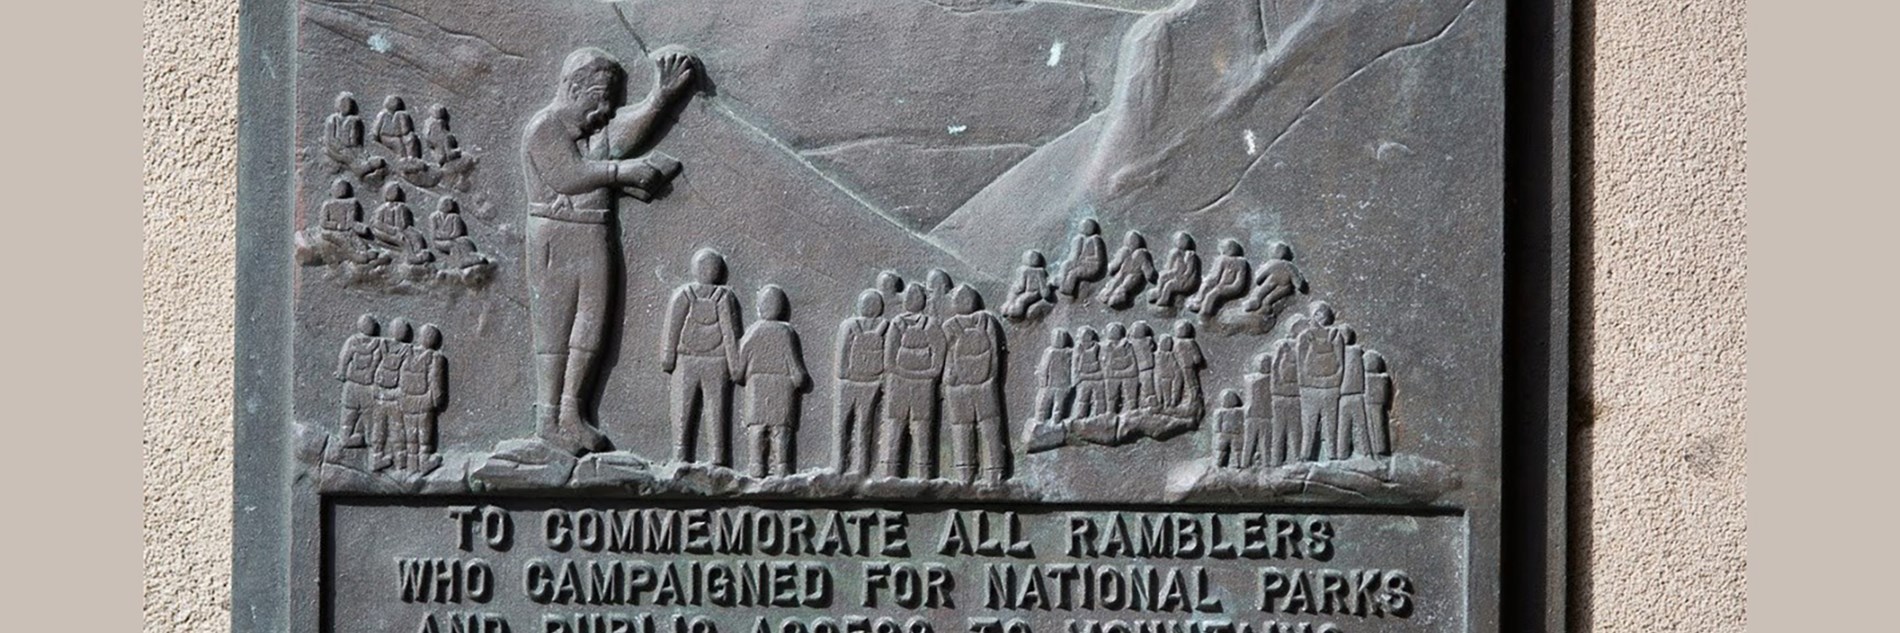 A commemorative stone relief plaque showing groups of ramblers walking and sitting, enjoying the countryside. There are hills in the background. The inscription reads "To commemorate all ramblers who campaigned for National Parks and public access to mountains and moorland. Year 2000".